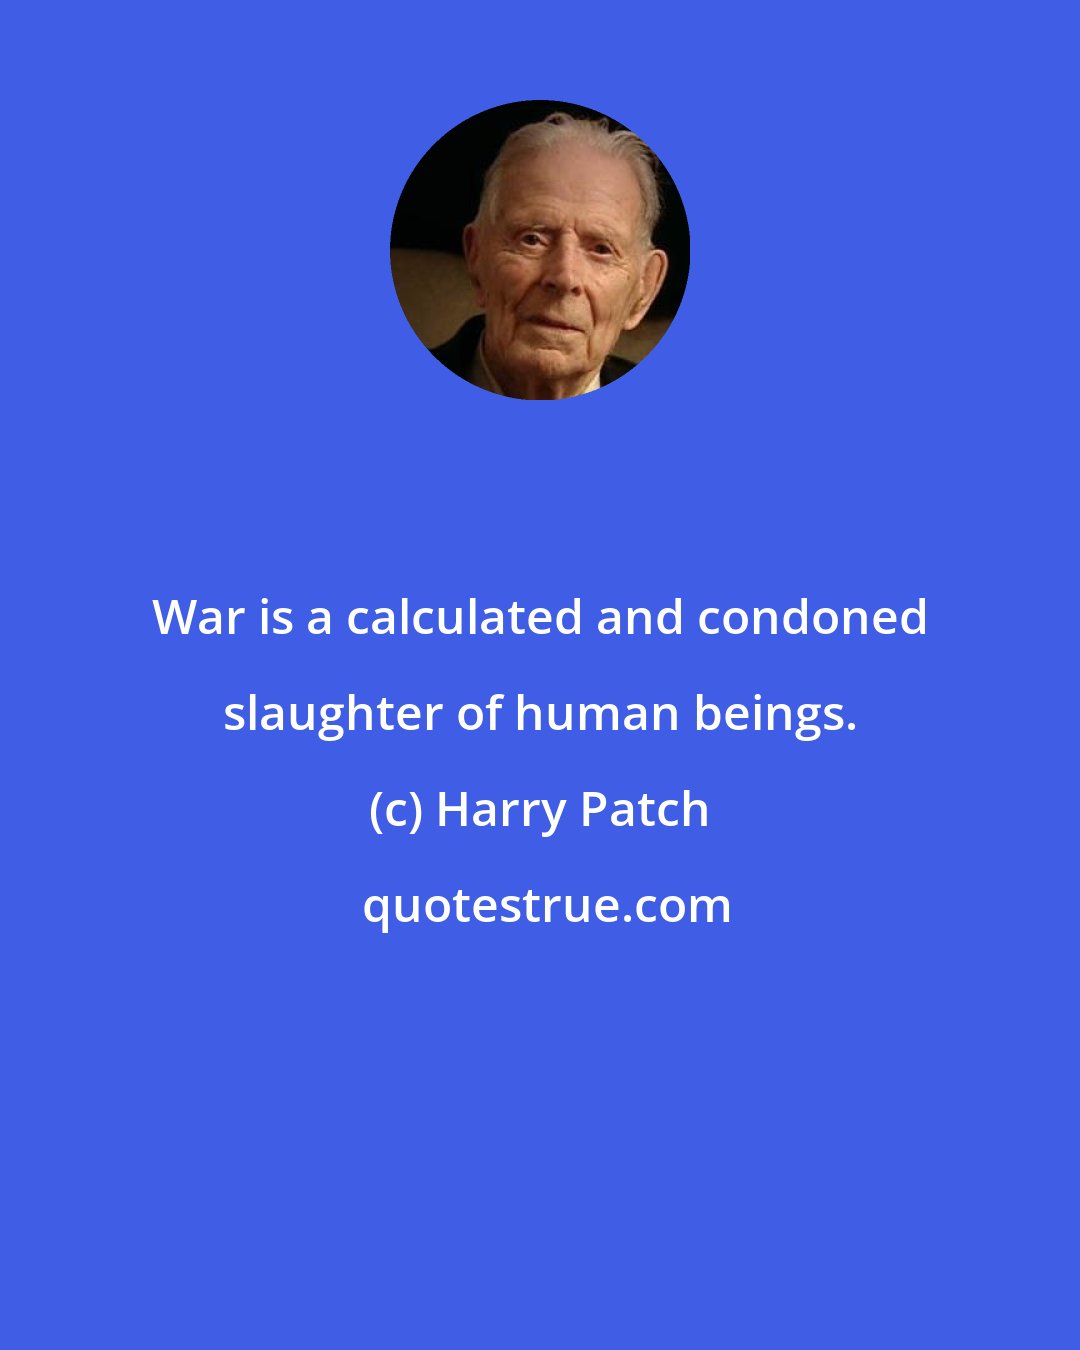 Harry Patch: War is a calculated and condoned slaughter of human beings.